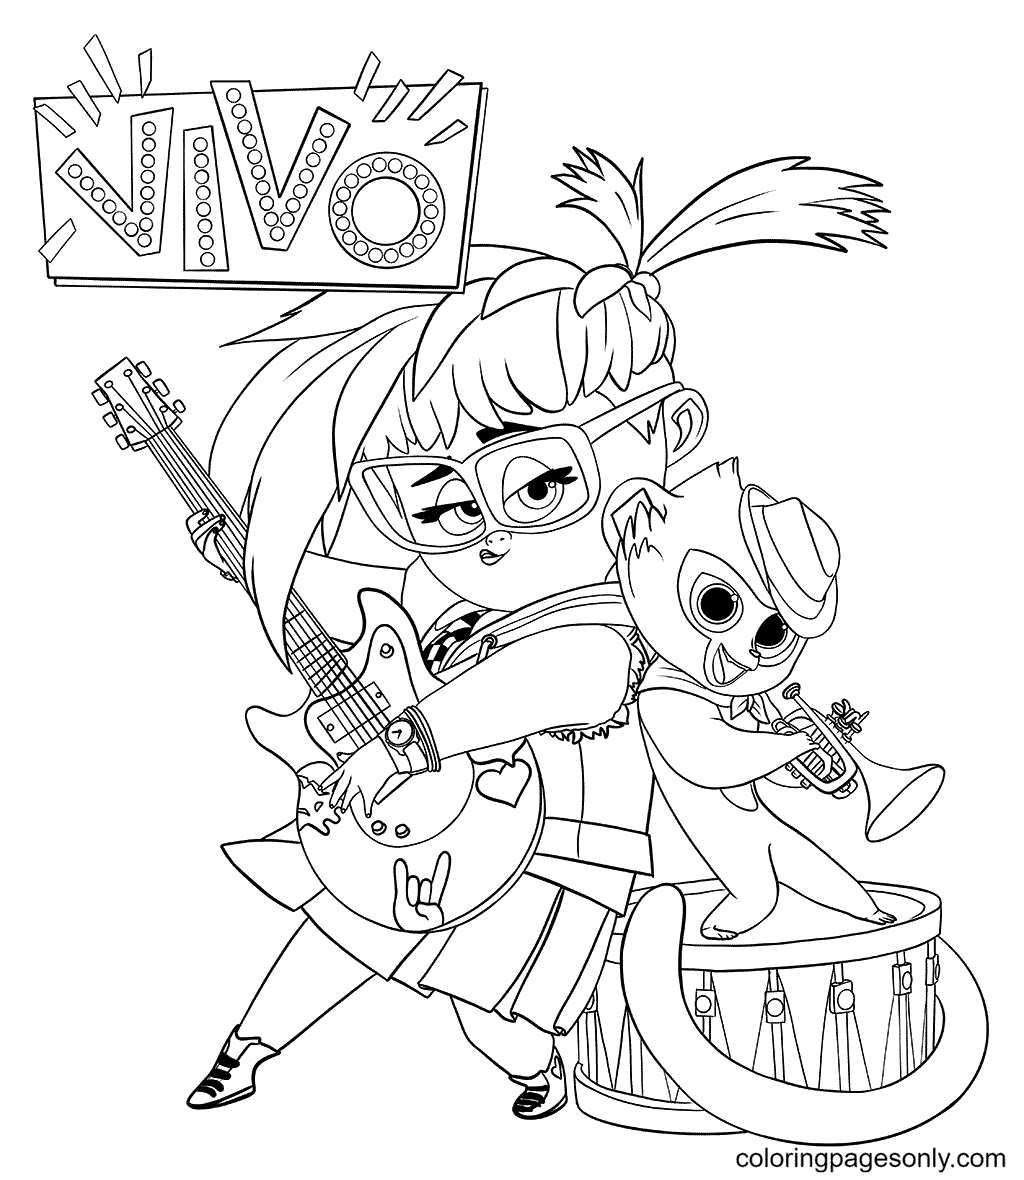 Monkey Vivo and Gabriela From Vivo Coloring Page